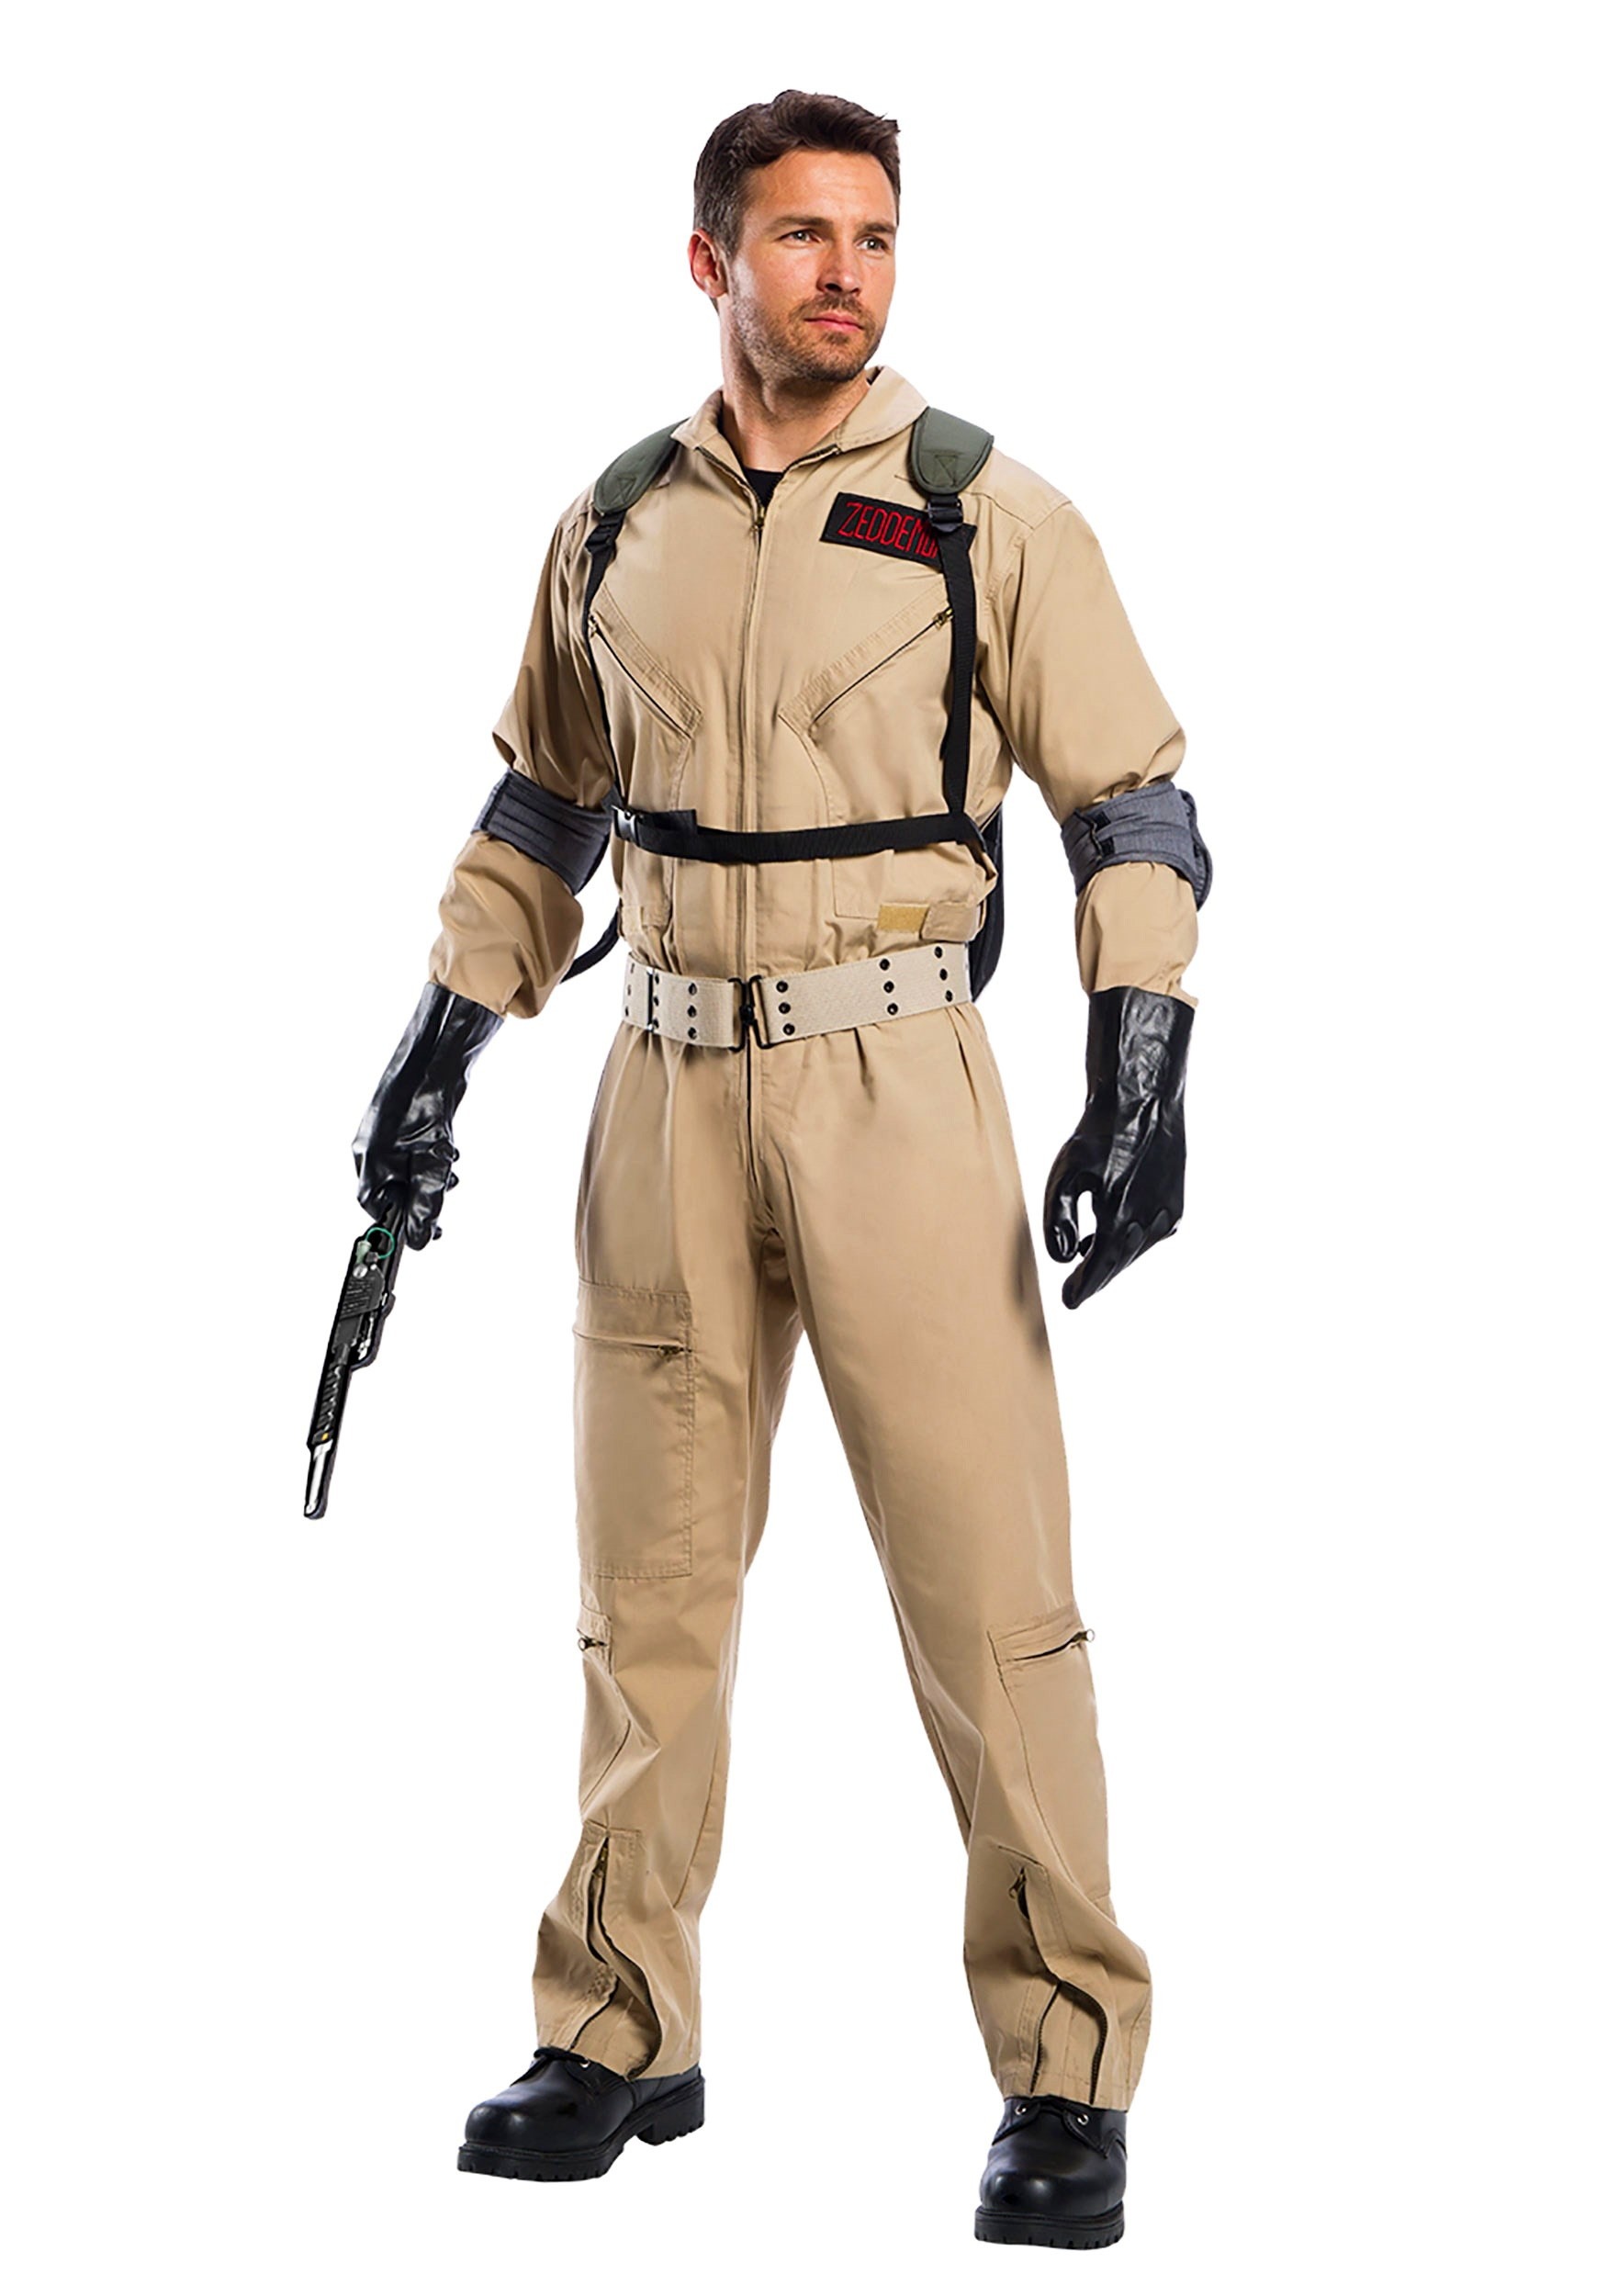 Premium Ghostbusters Costume for Adults